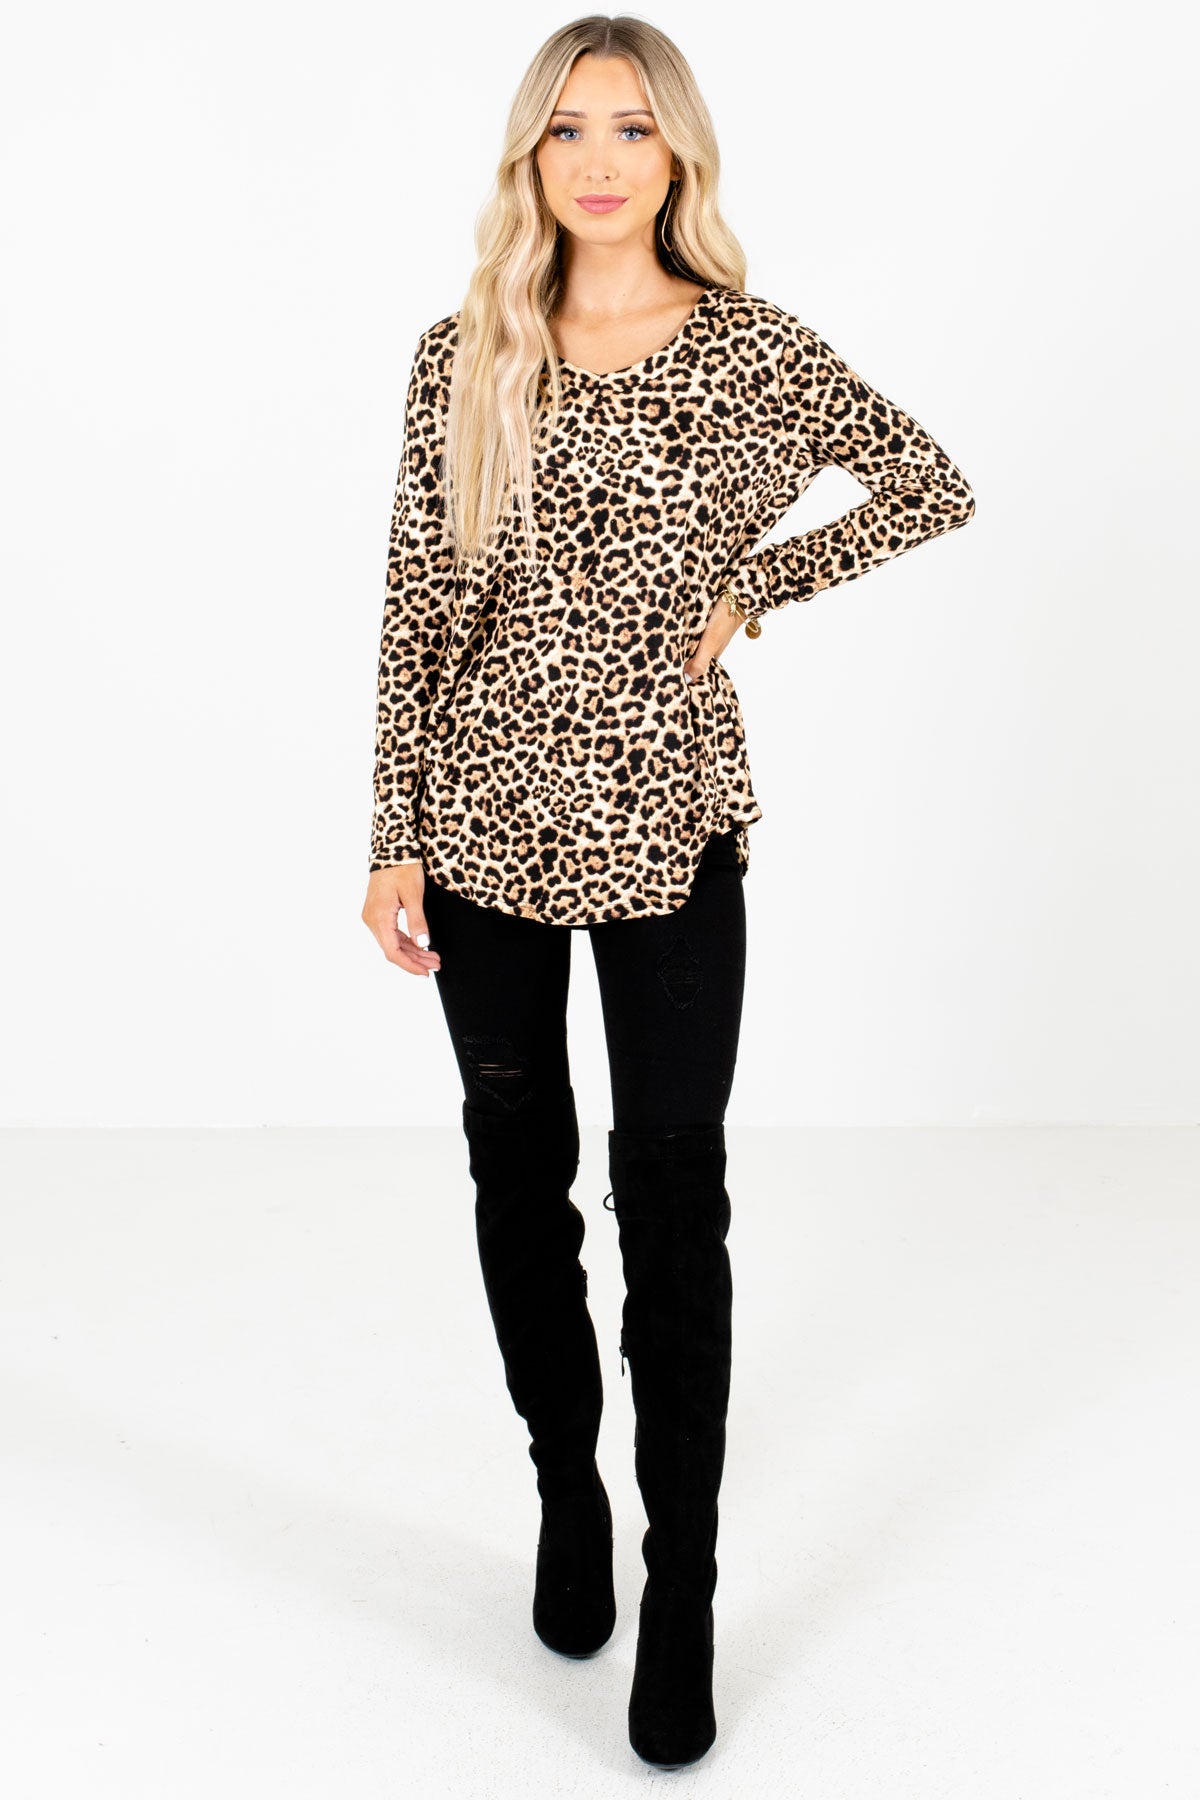 Beige Cute and Comfortable Boutique Leopard Print Tops for Women 